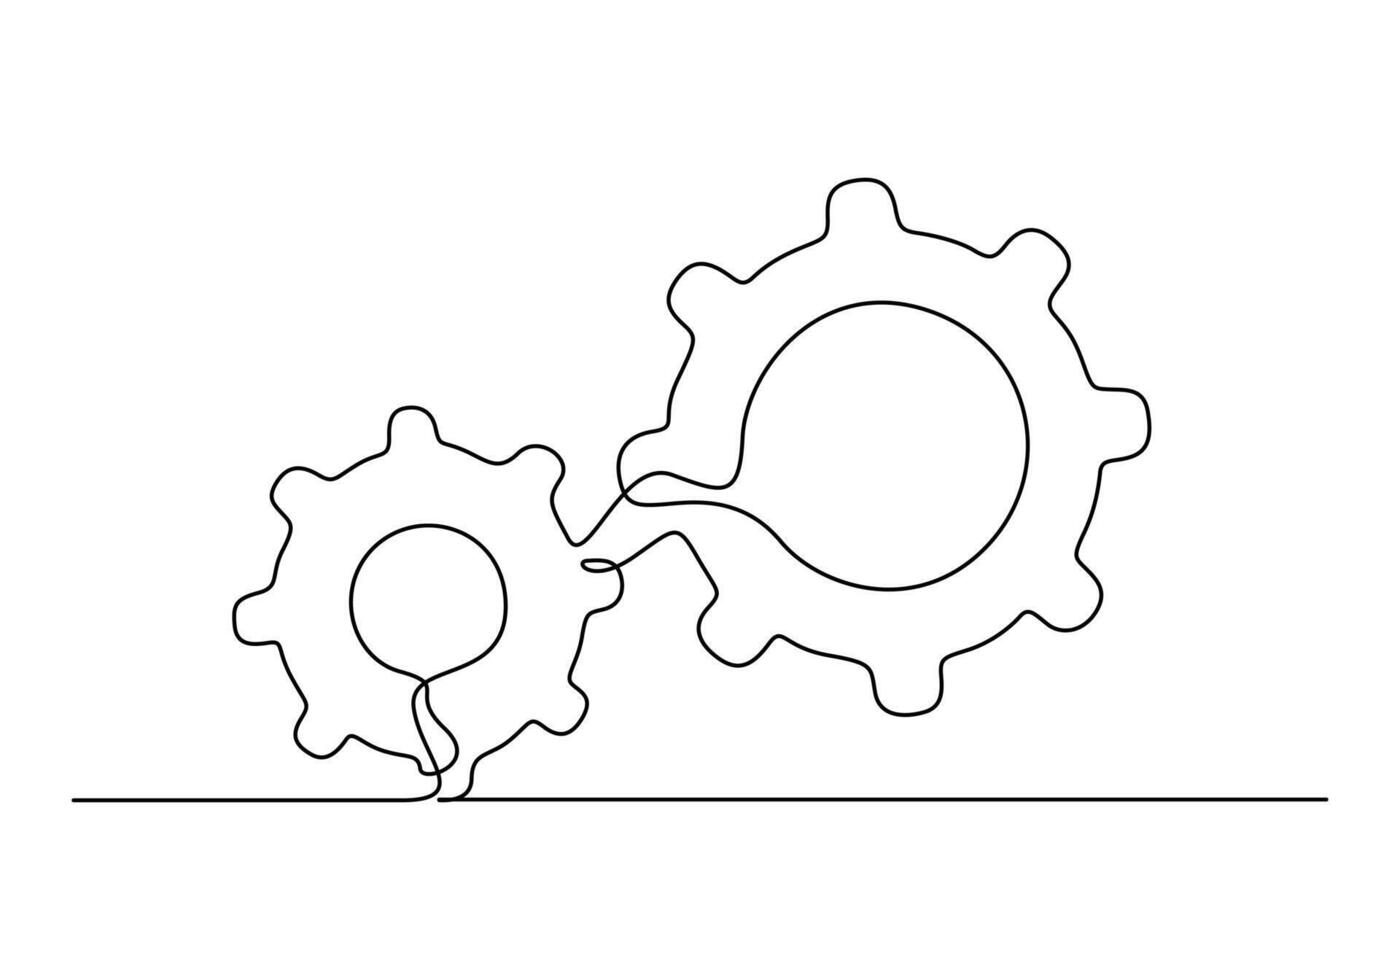 Setting icon continuous single line drawing pro illustration vector